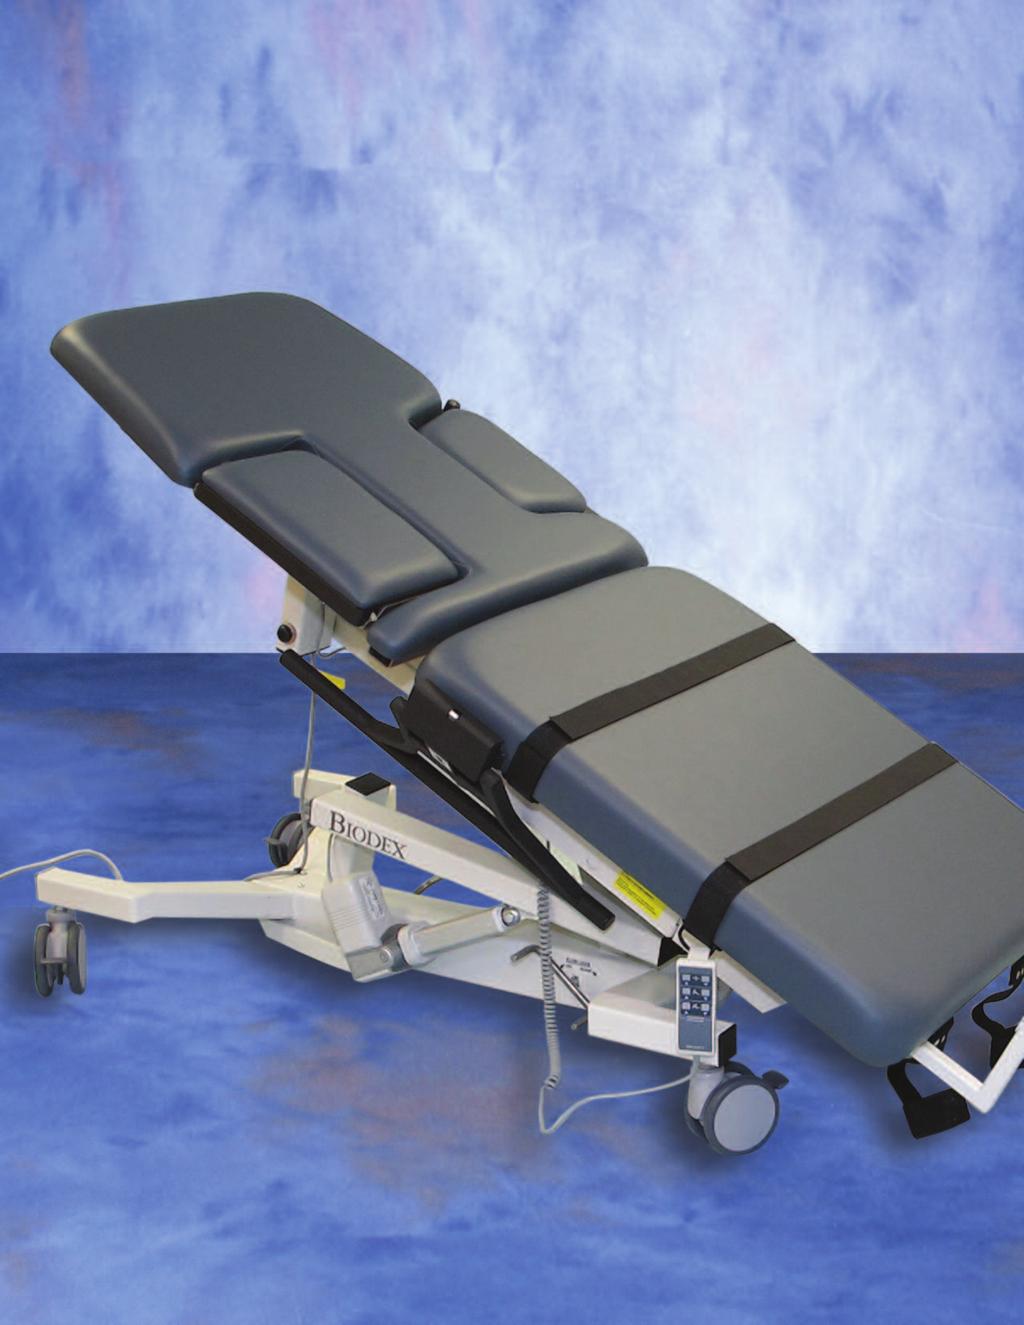 Fowler Back motor controlled with infinite adjustment through 80 Paper Dispenser (optional) Cardiac Scanning Cutout with pivoting cushion that doubles as an armrest Fold